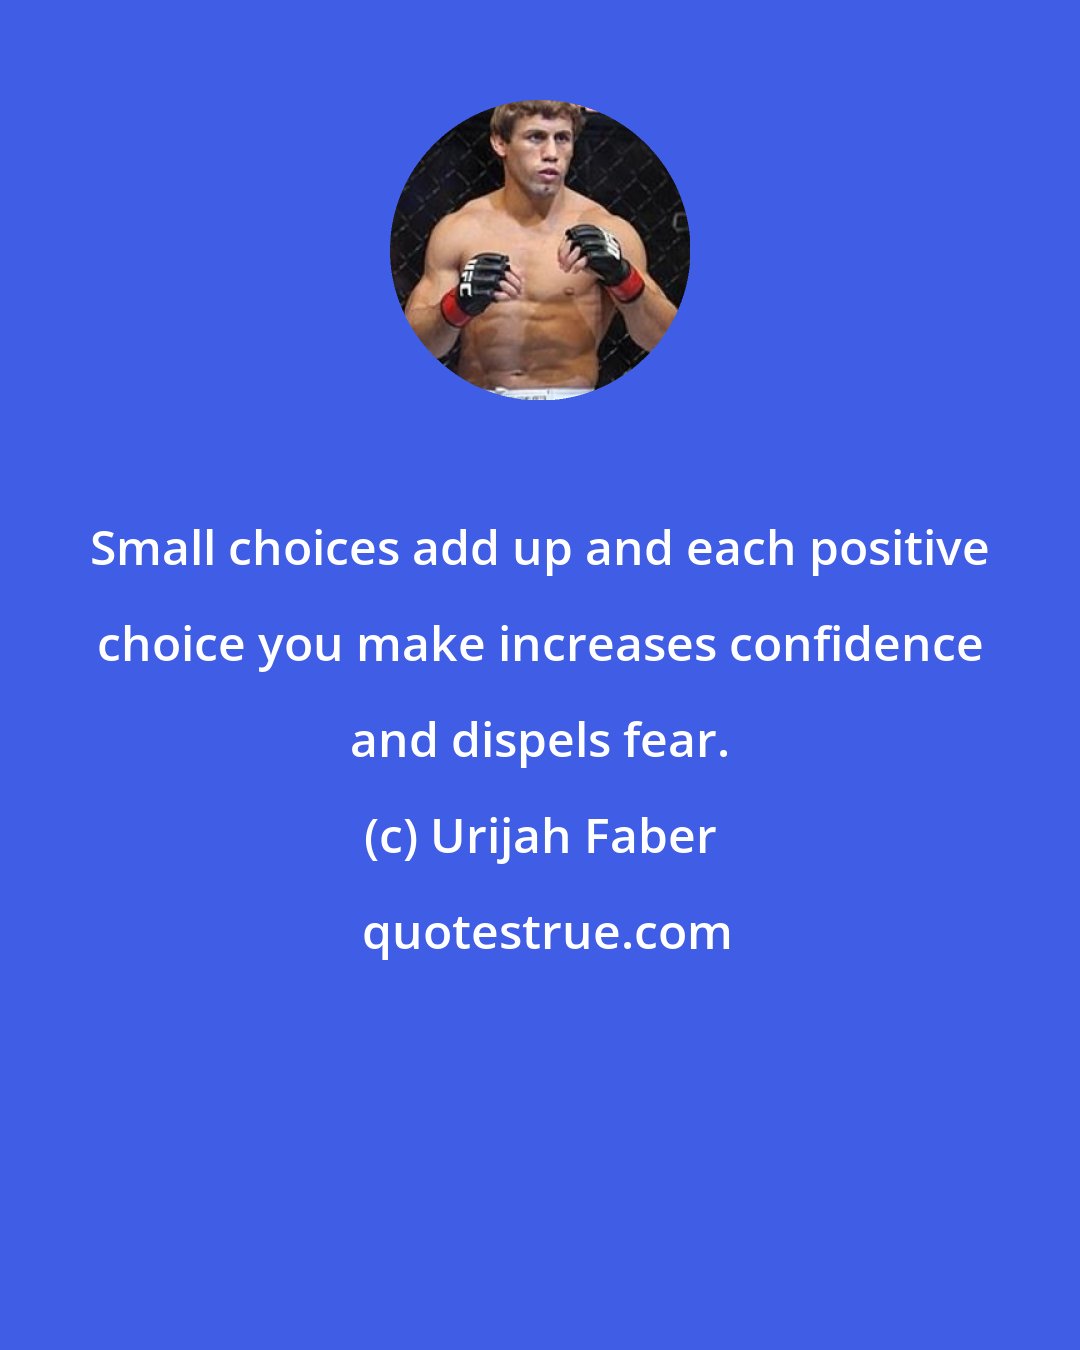 Urijah Faber: Small choices add up and each positive choice you make increases confidence and dispels fear.